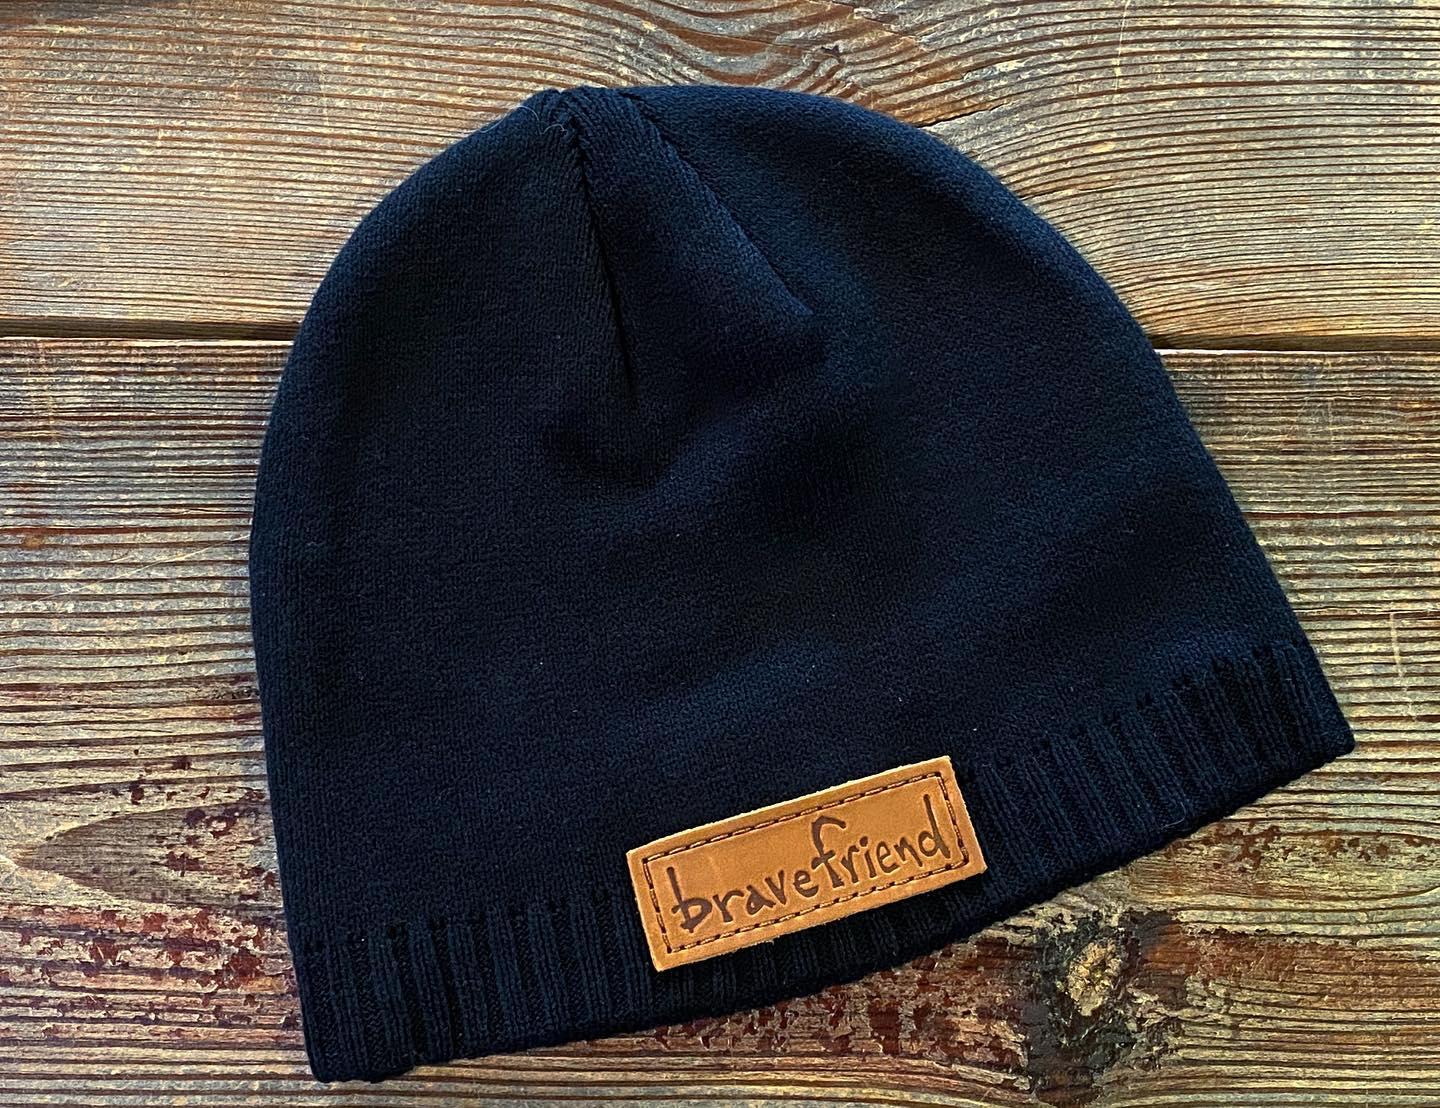 Bravefriend Knit Beanie with Leather Patch | Bravefriend Apparel and Design